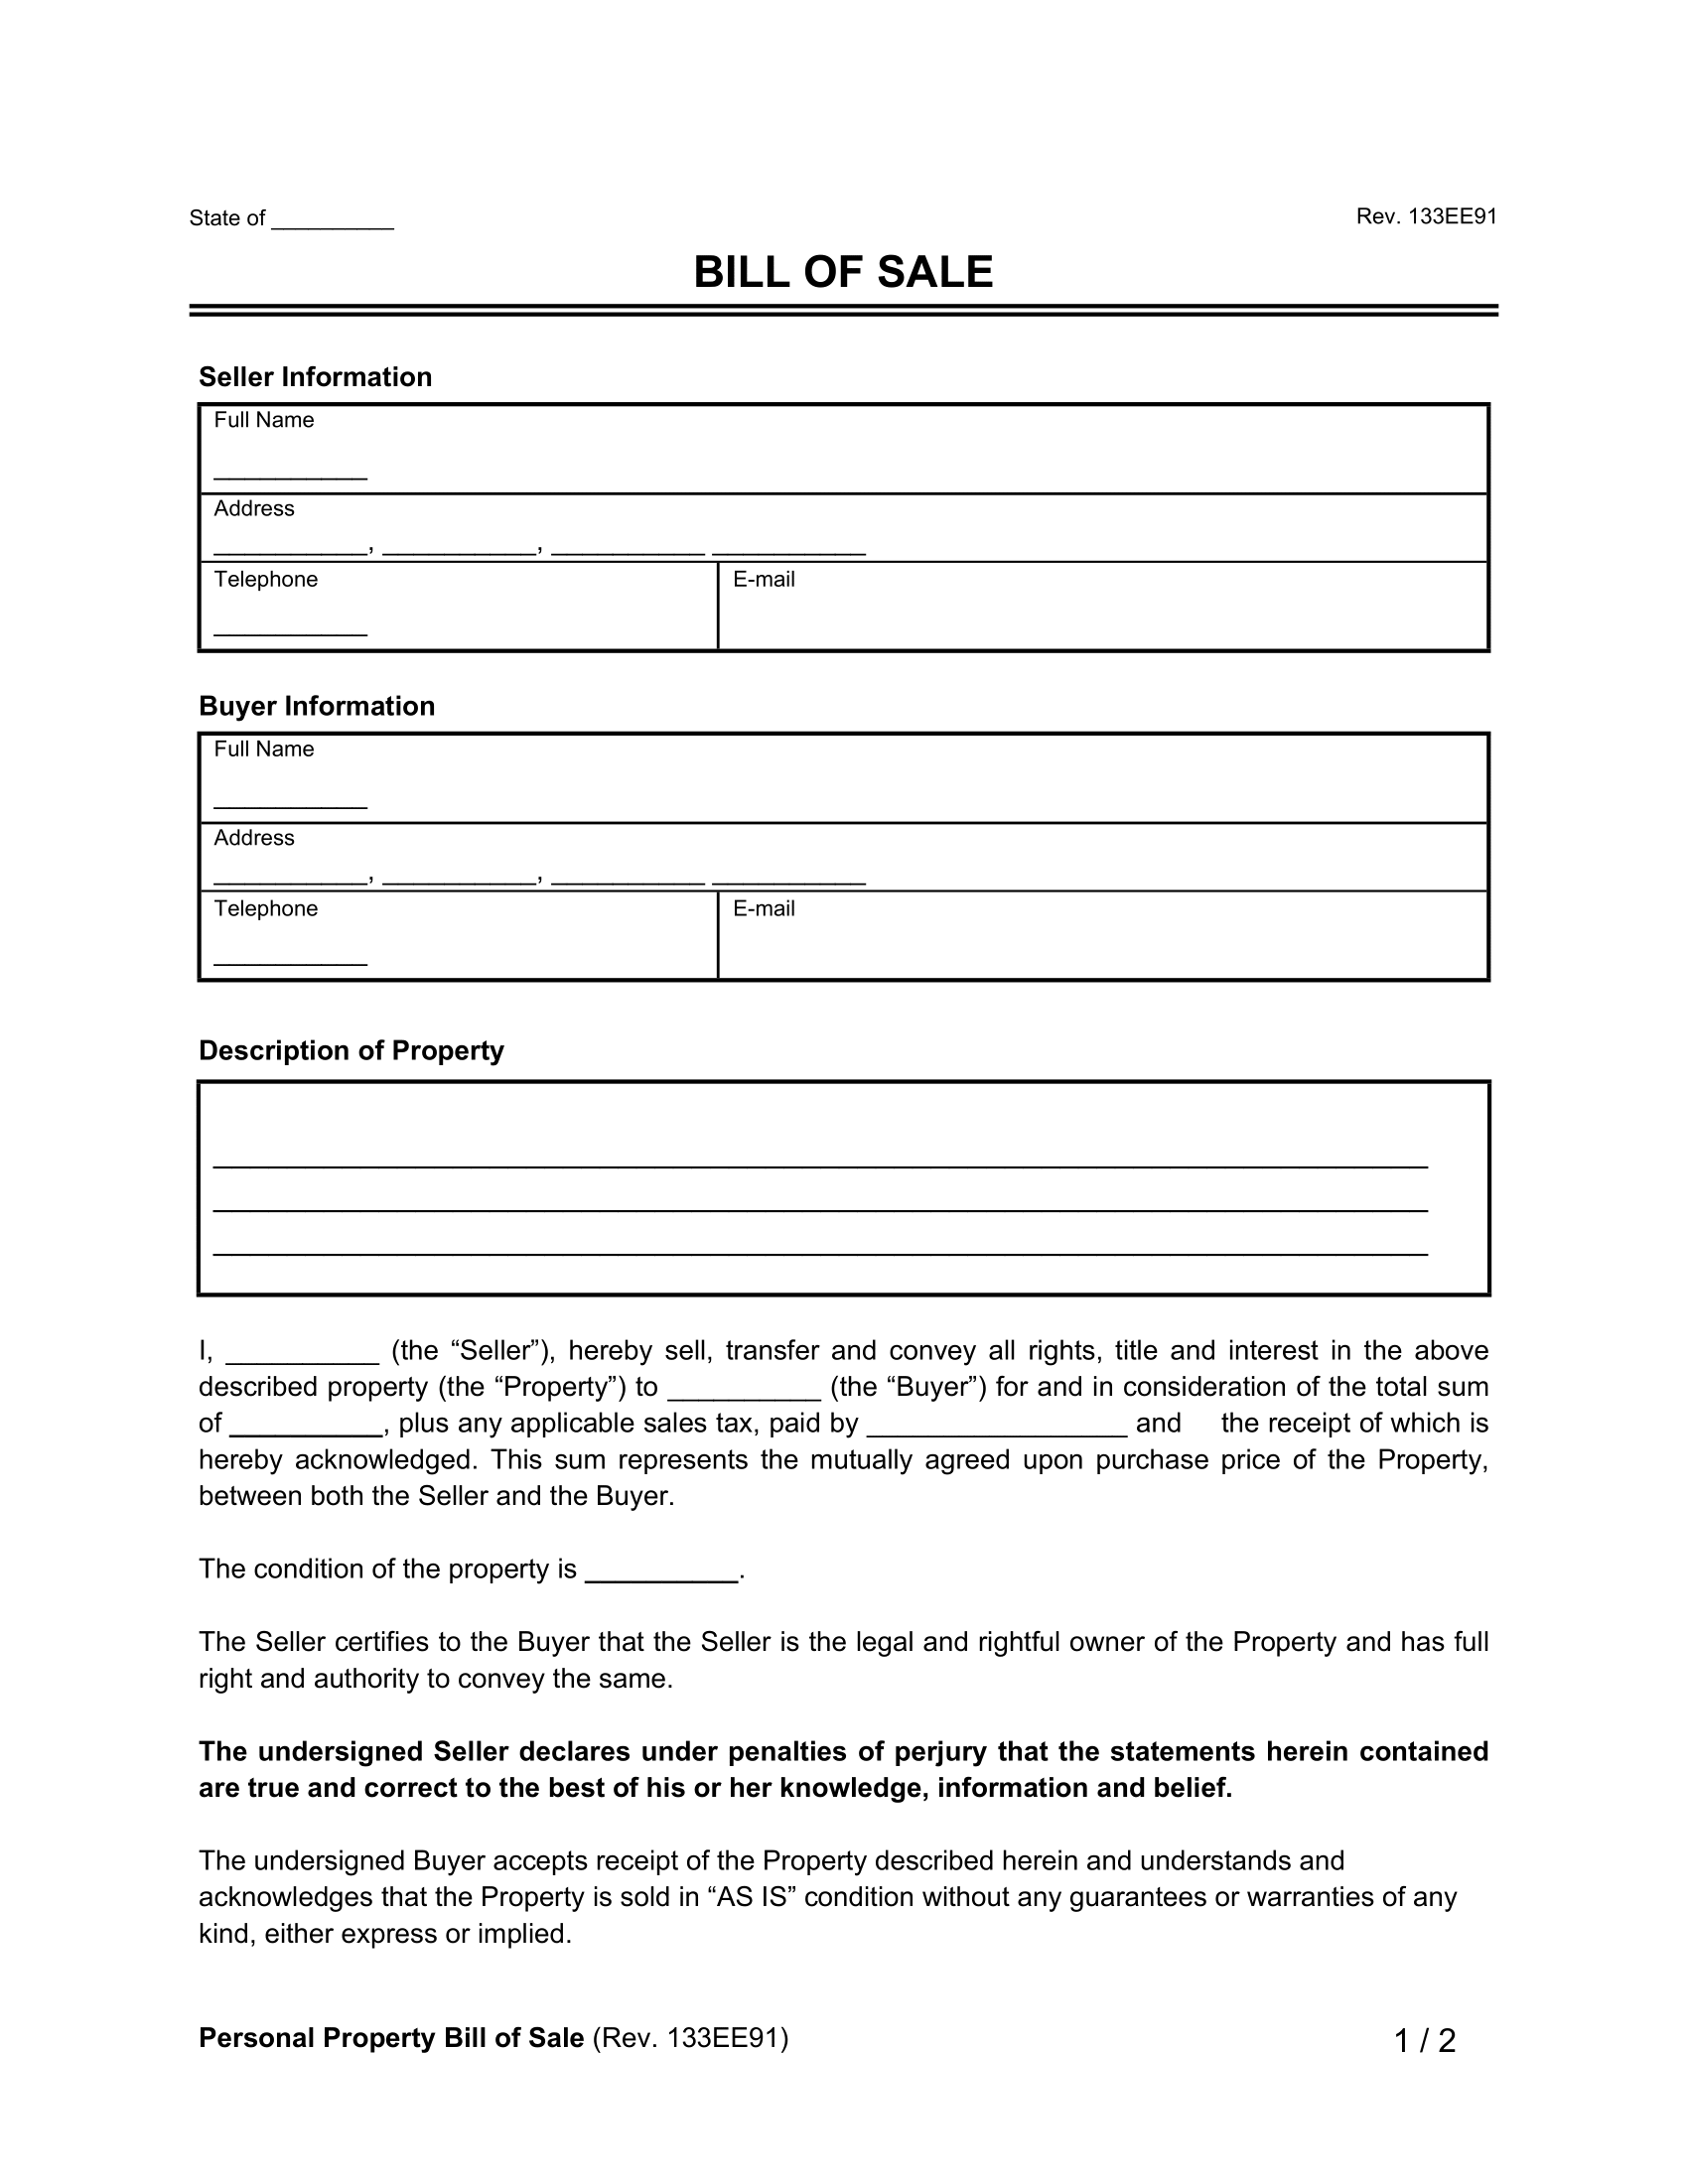 Free Bill Of Sale Forms 31 PDF Word - Free Printable Blank Auto Bill of Sale